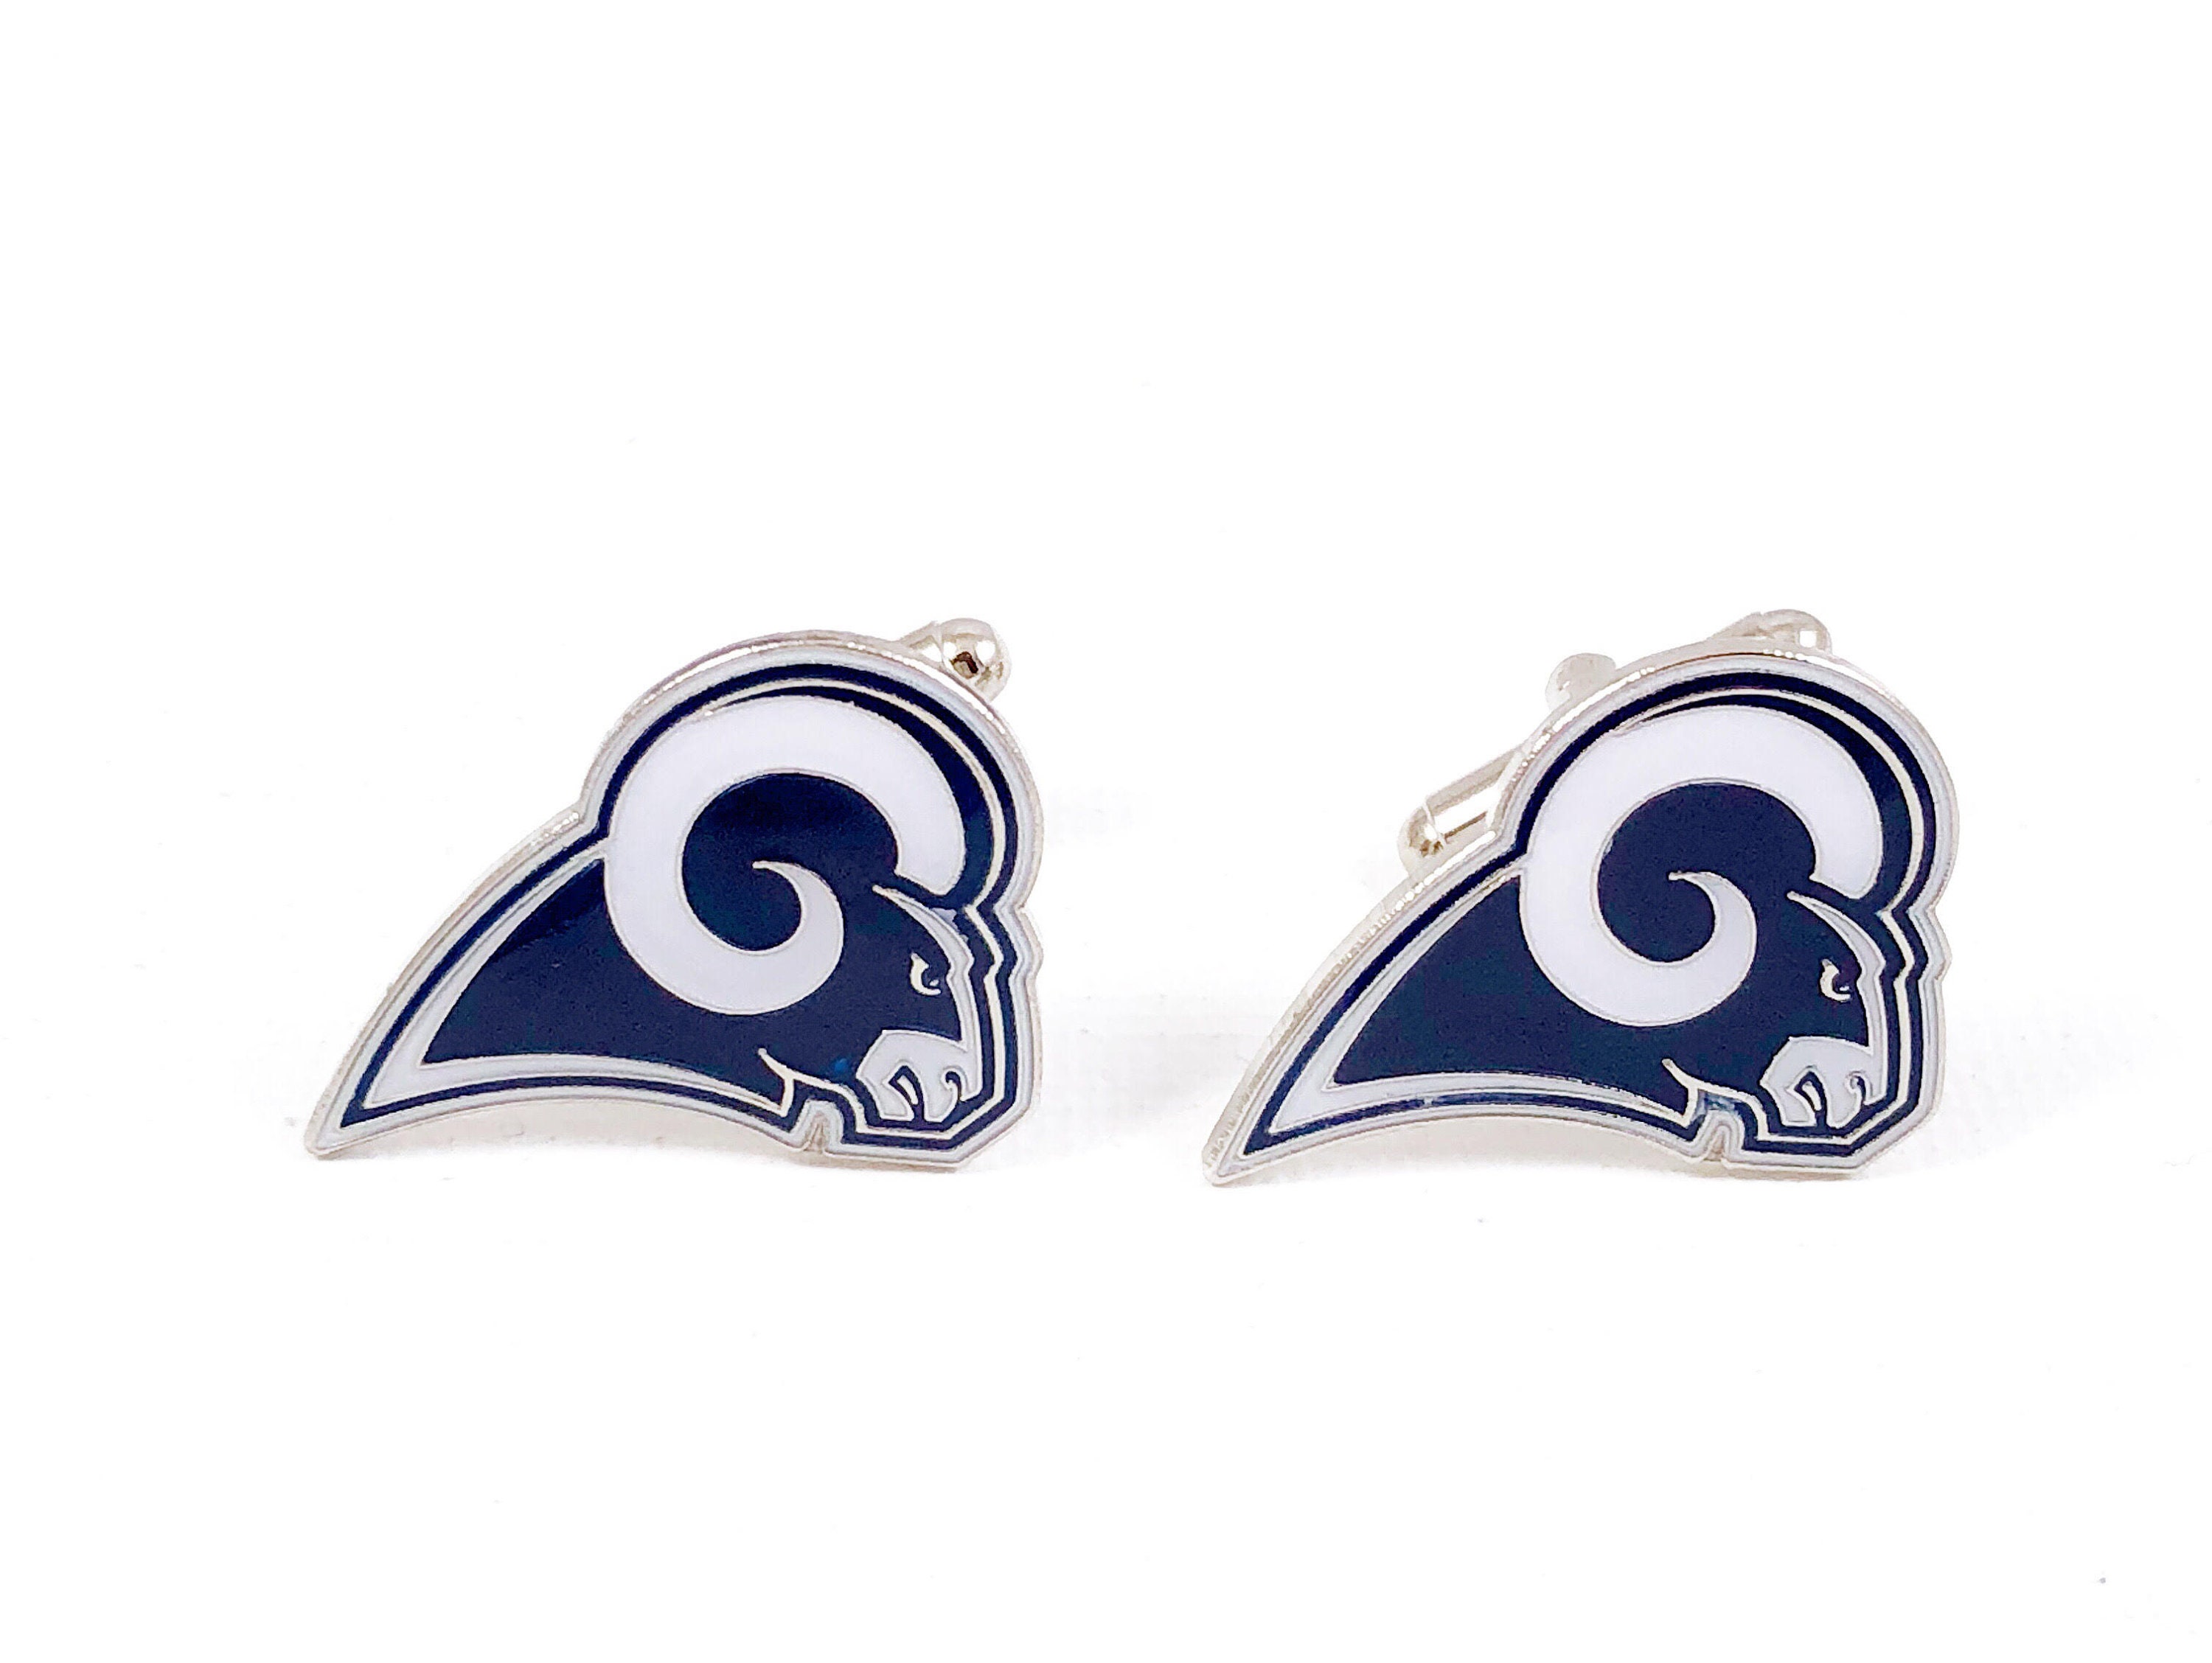 Los Angeles Rams Cuff Links Free Shipping With Usps First Class Domestic Mail